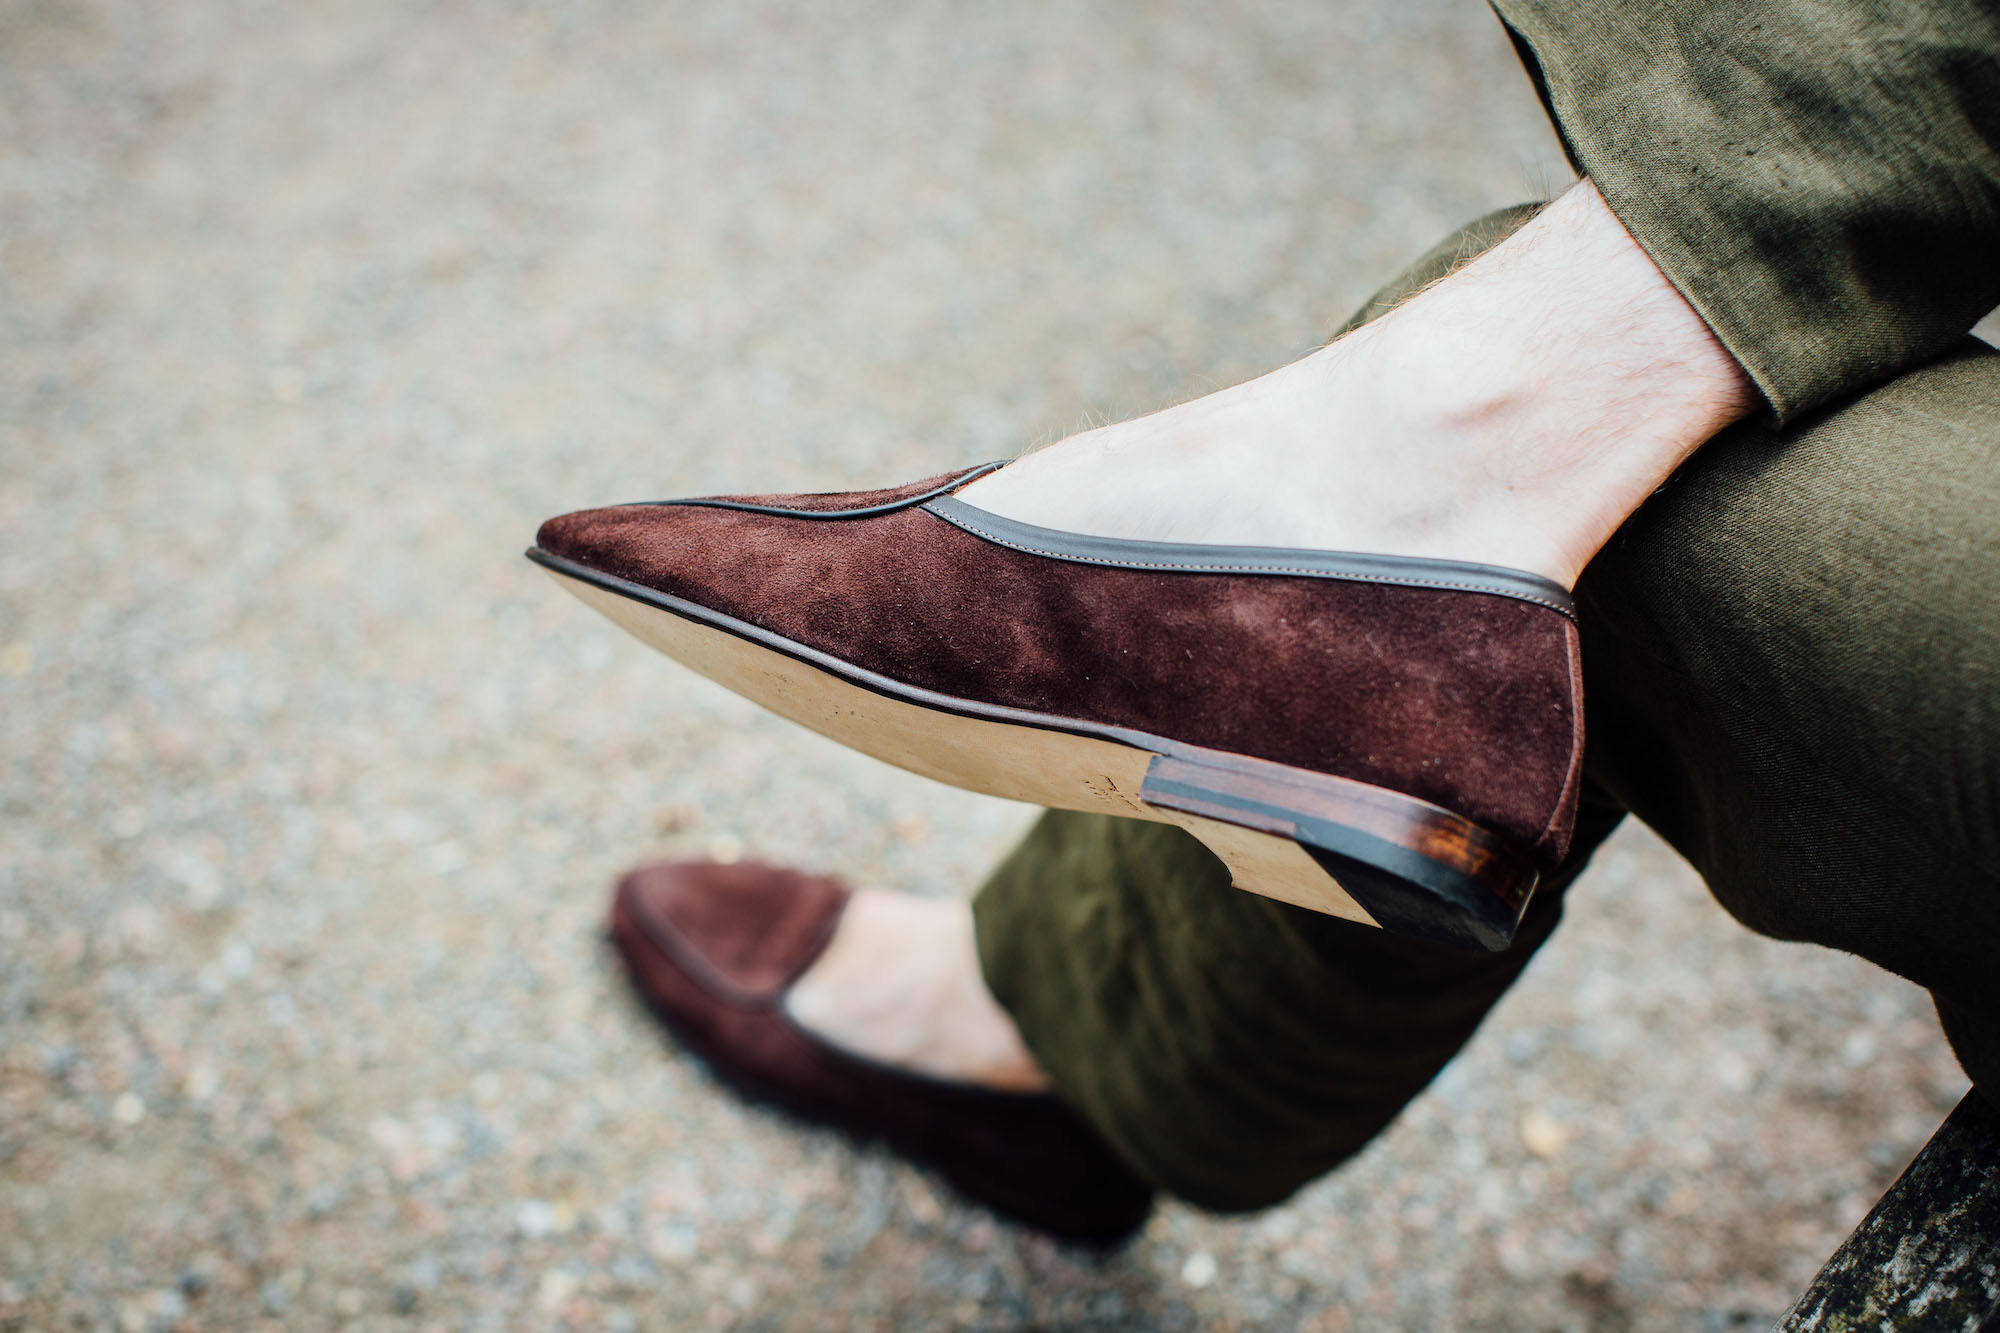 The Sagan: A high-end Belgian loafer from Allan Baudoin